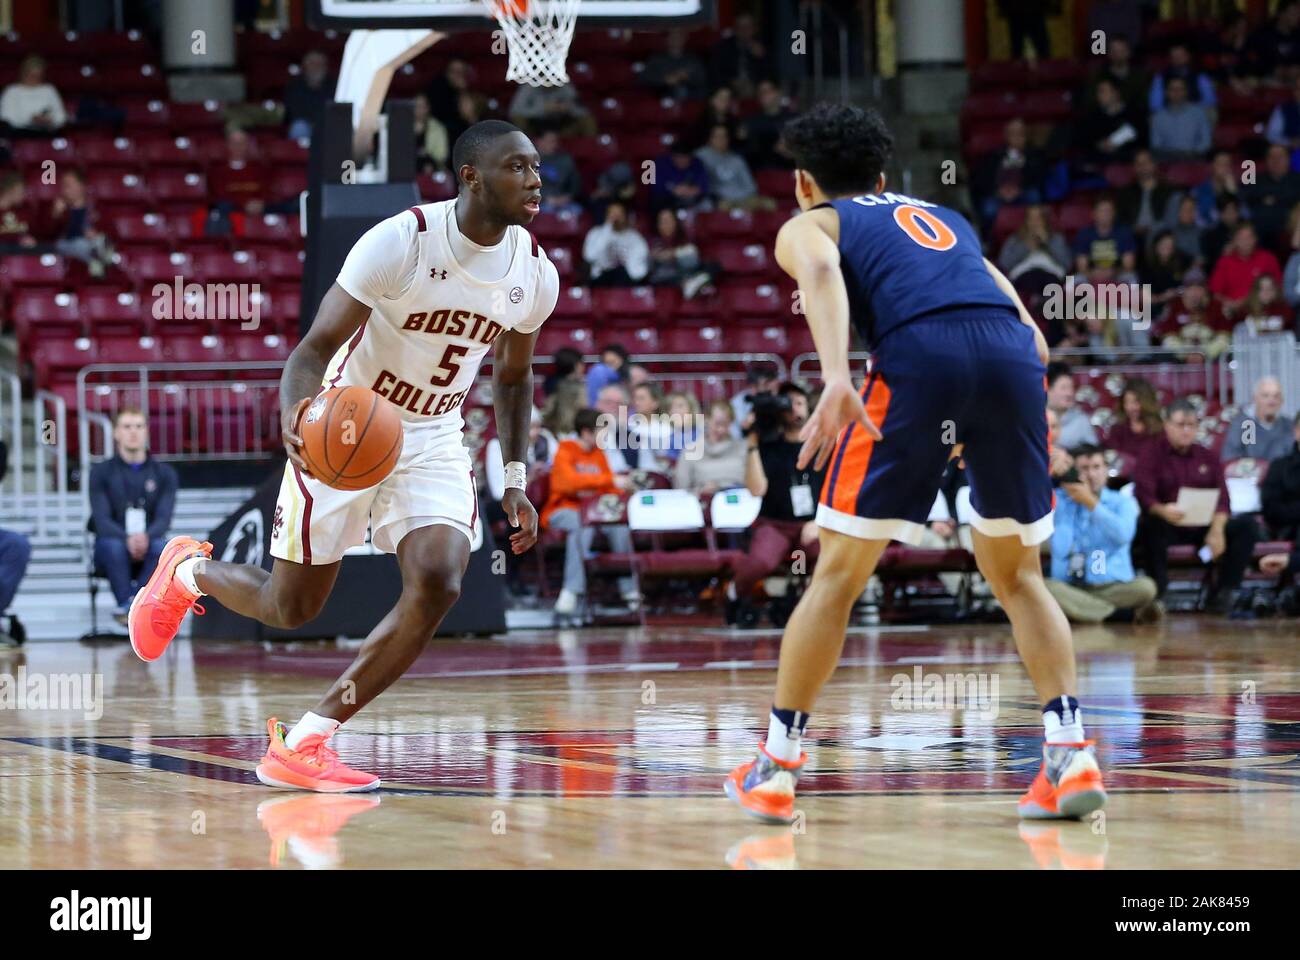 Conte Forum. 7th Jan, 2020. MA, USA; Boston College Eagles guard Jay Heath (5) and Virginia Cavaliers guard Kihei Clark (0) in action during the NCAA basketball game between Virginia Cavaliers and Boston College Eagles at Conte Forum. Anthony Nesmith/CSM/Alamy Live News Stock Photo